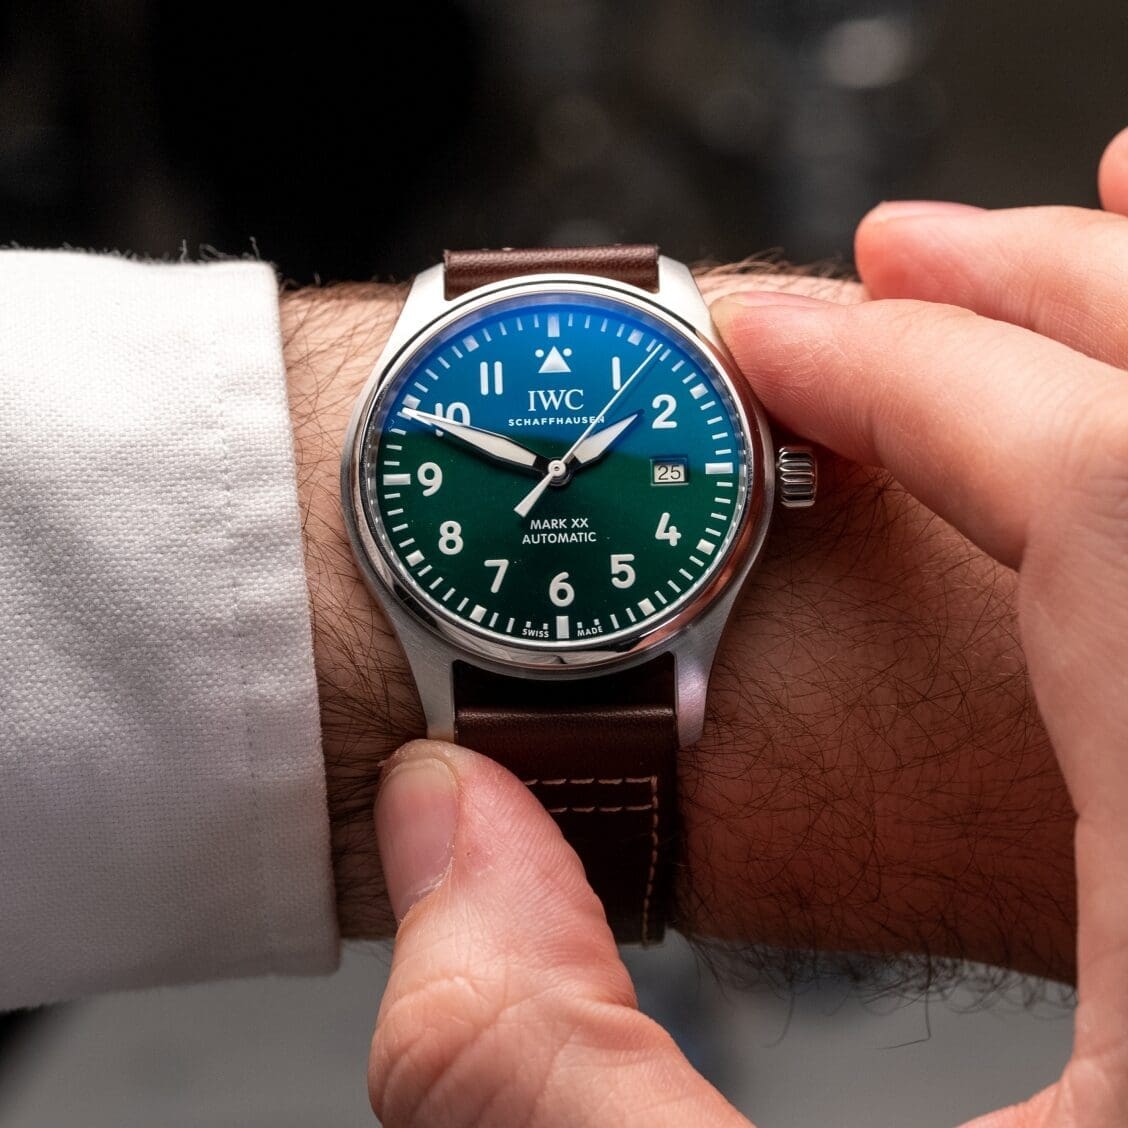 Big Watches, Small Wrists Part III: Can I pull off a pilot’s watch?